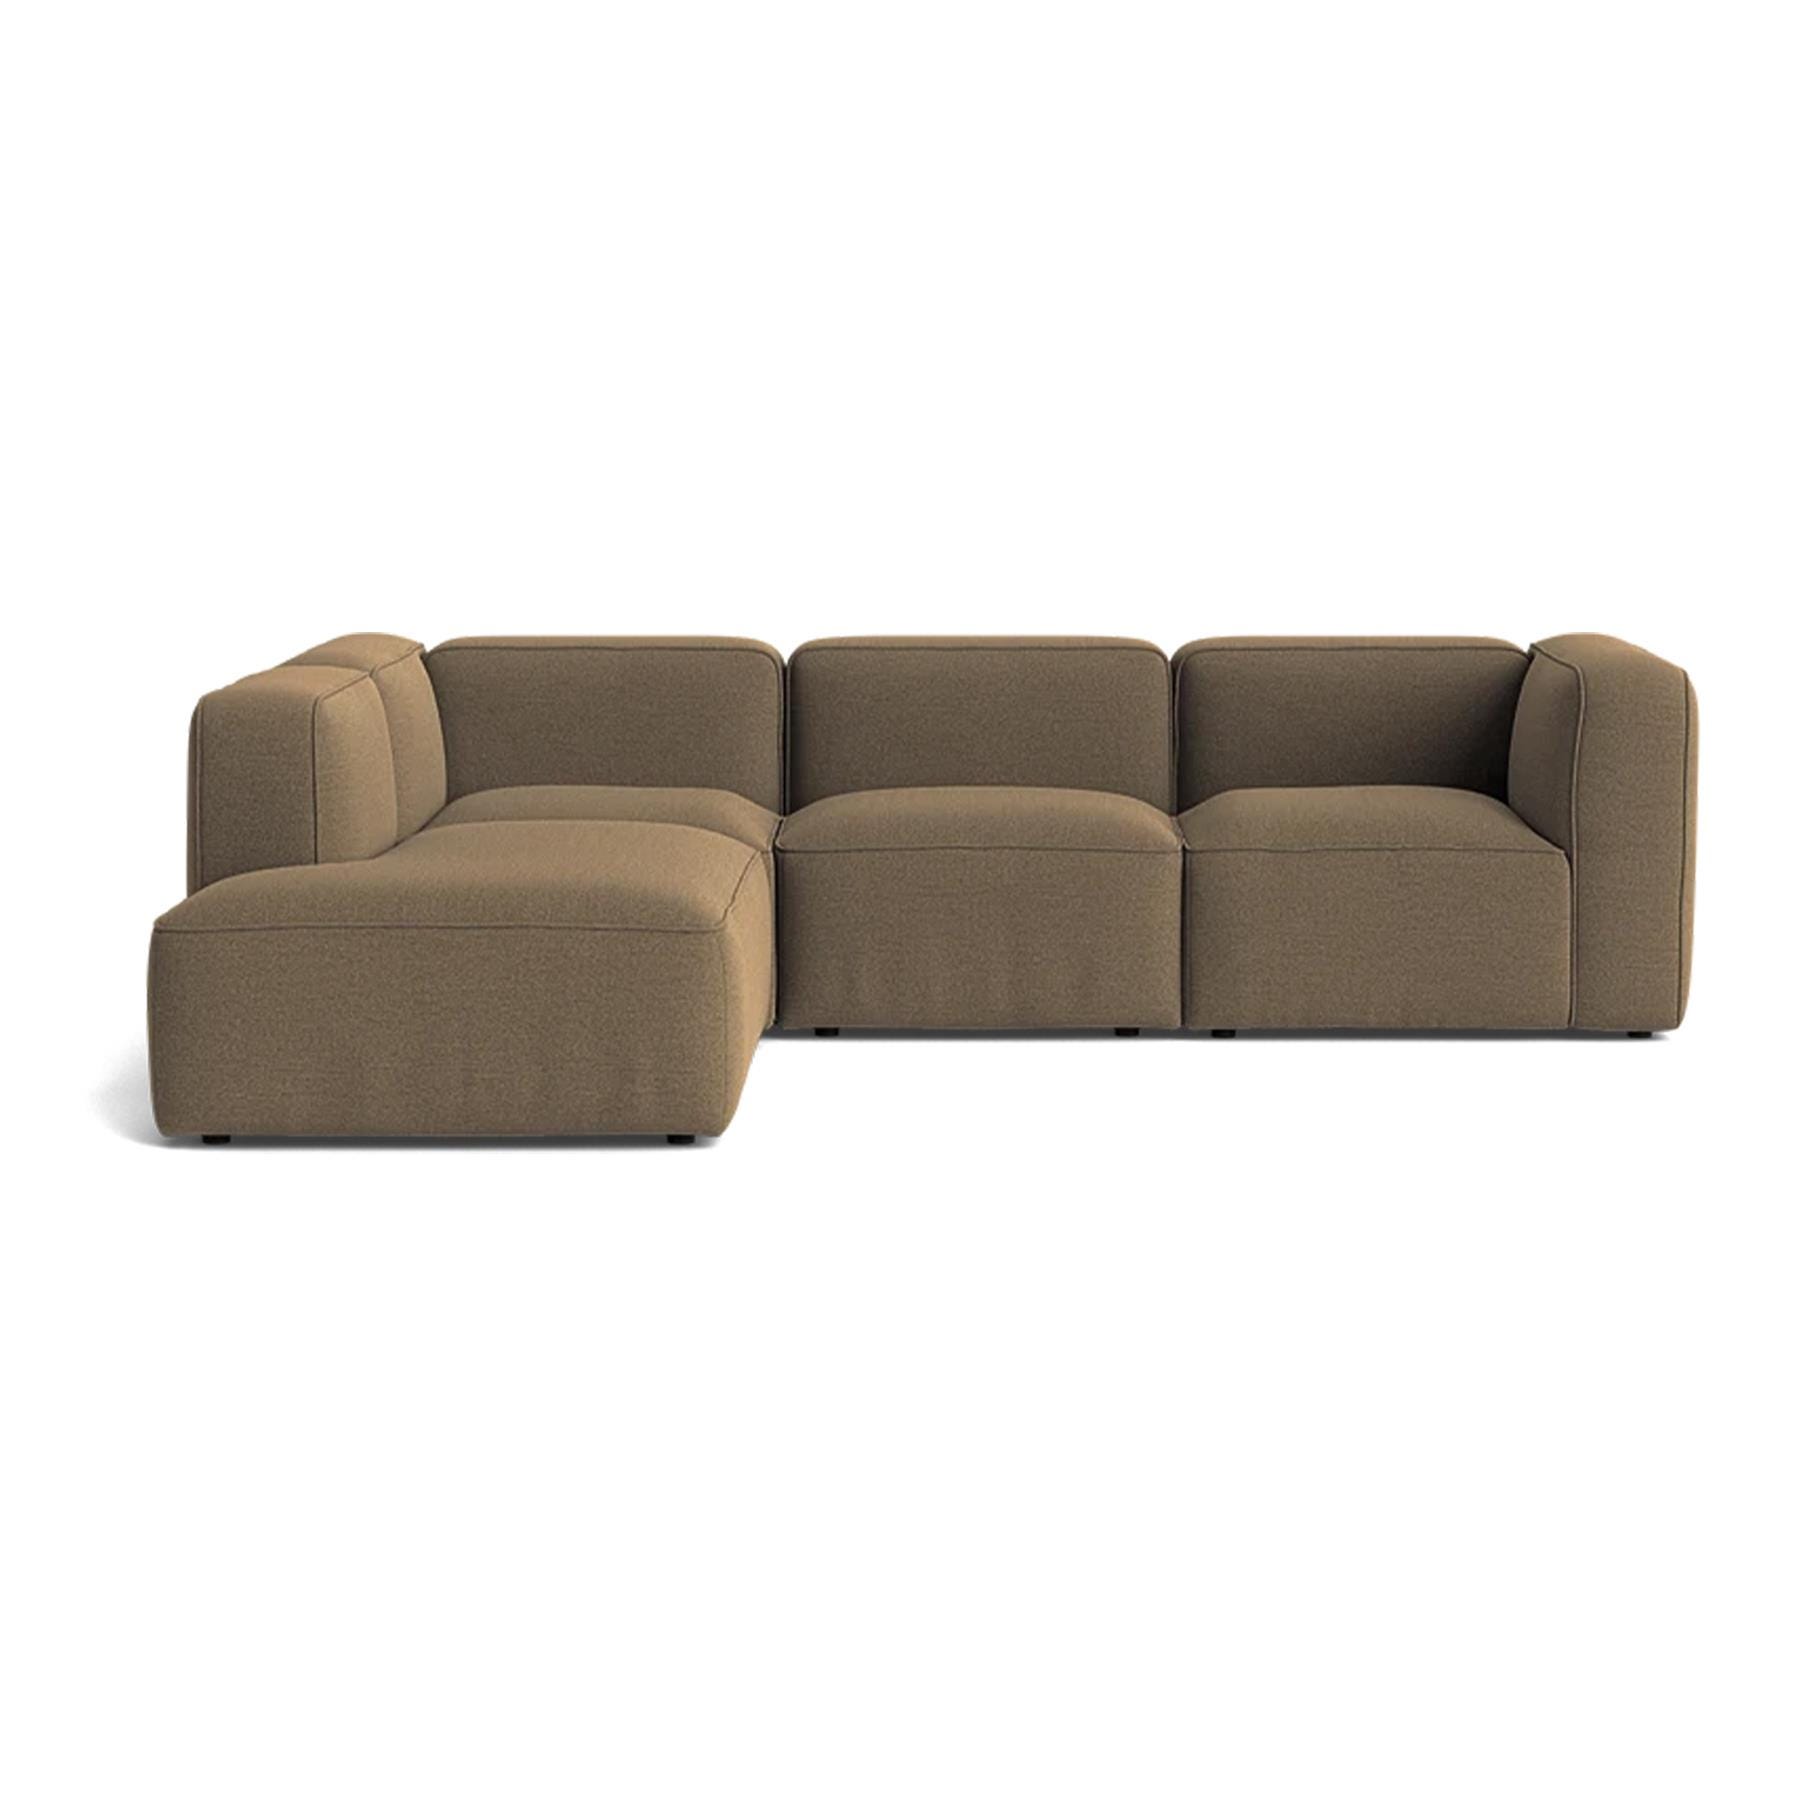 Make Nordic Basecamp Small Family Sofa Rewool 358 Left Brown Designer Furniture From Holloways Of Ludlow